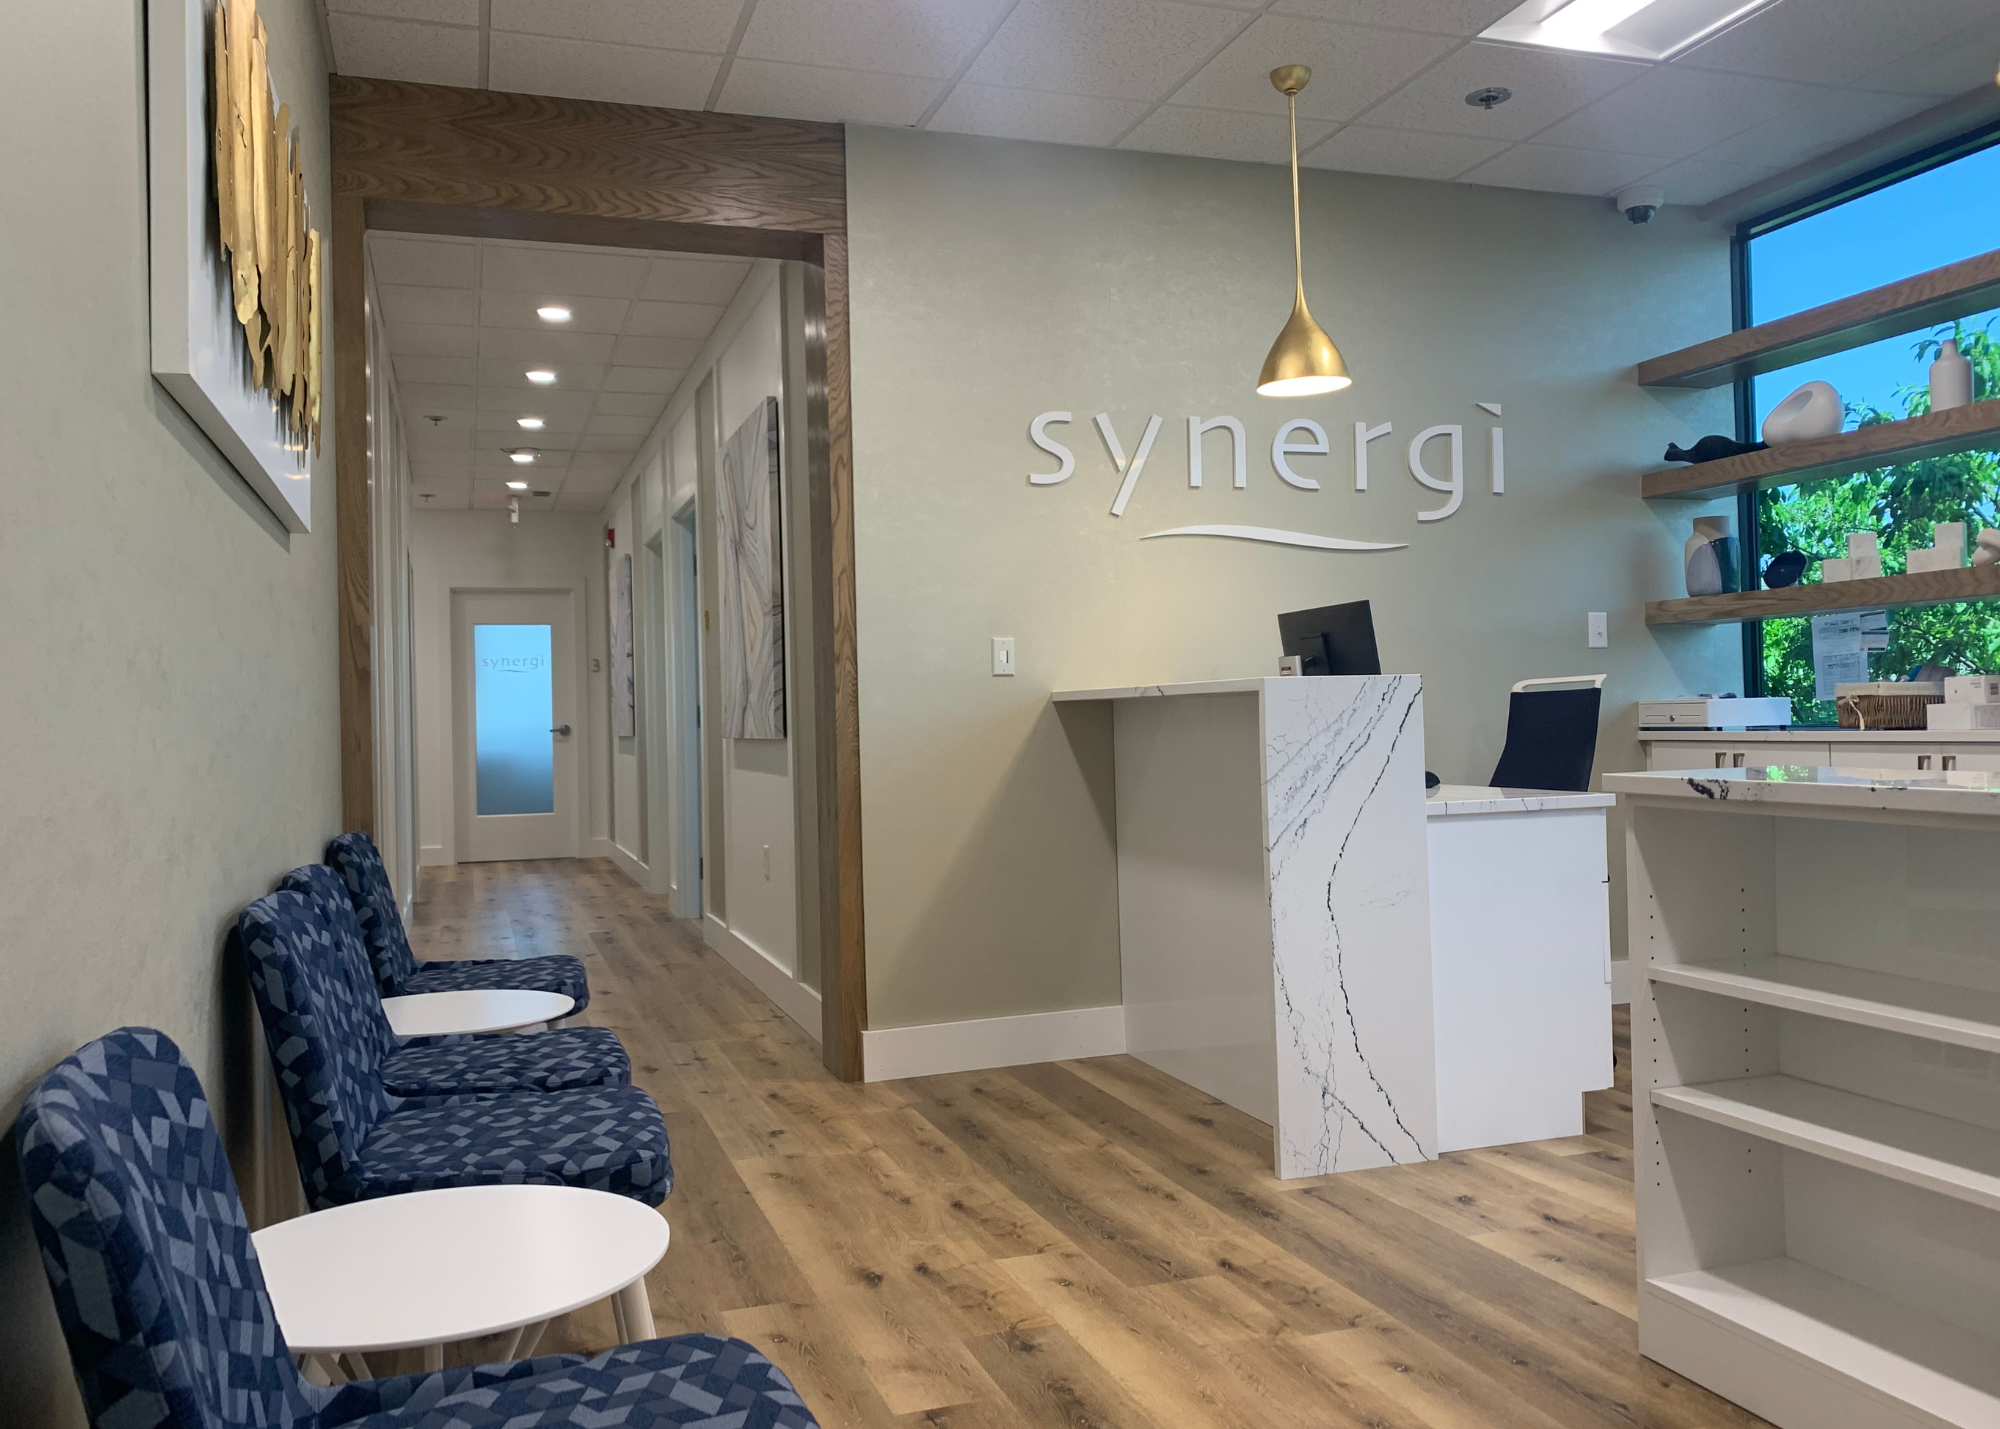 Inside Synergi Injectable Suite 1